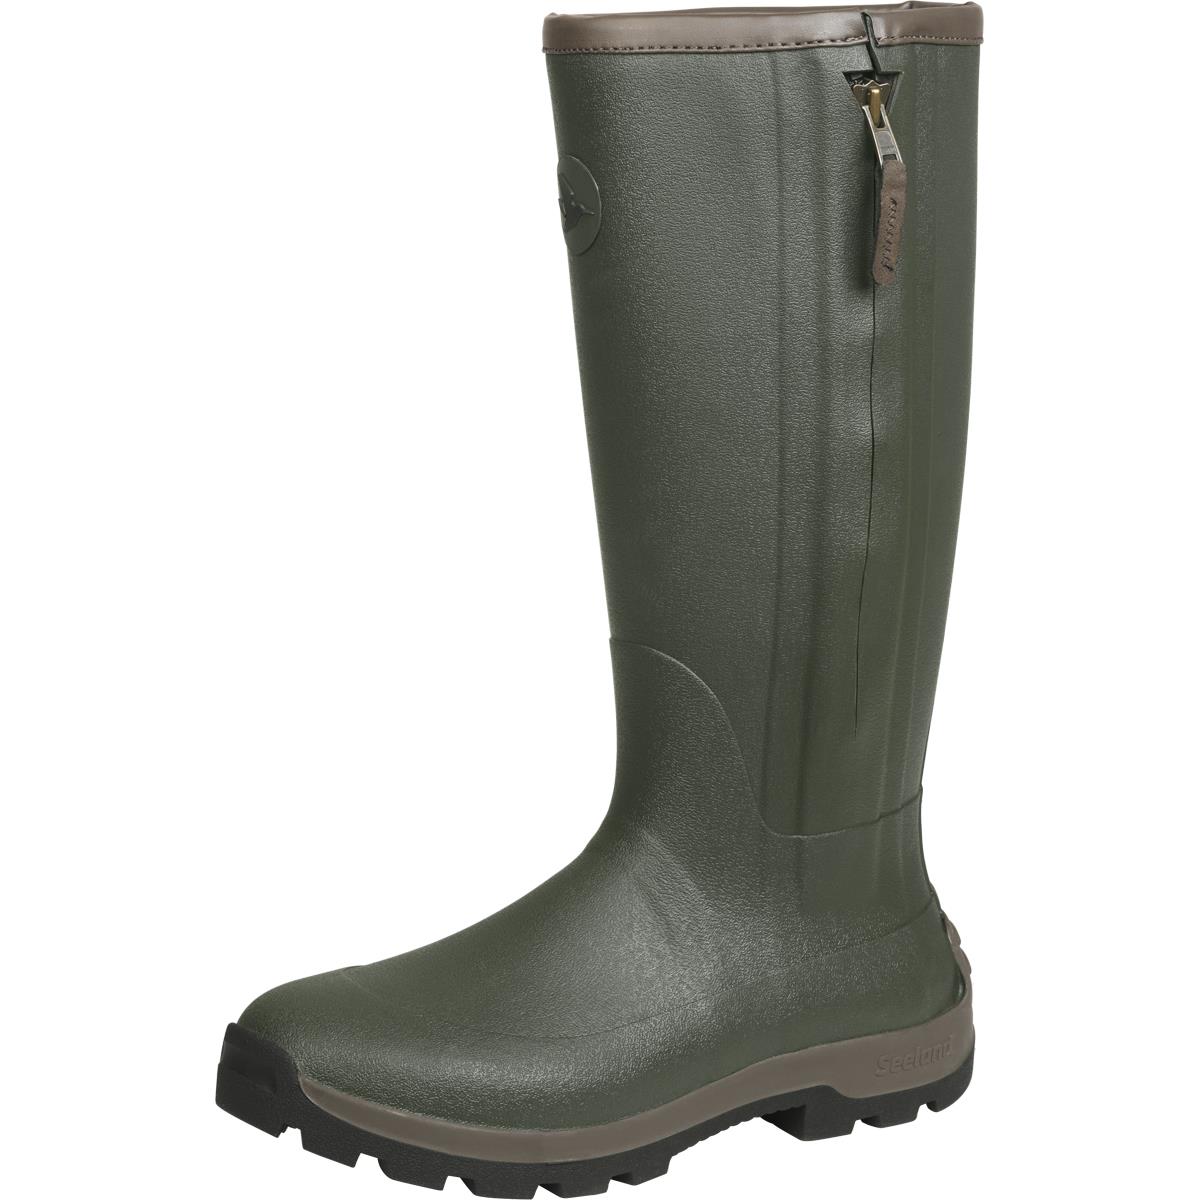 What is the measurement around the calf for Seeland Noble Zip Men's Wellington Boots?